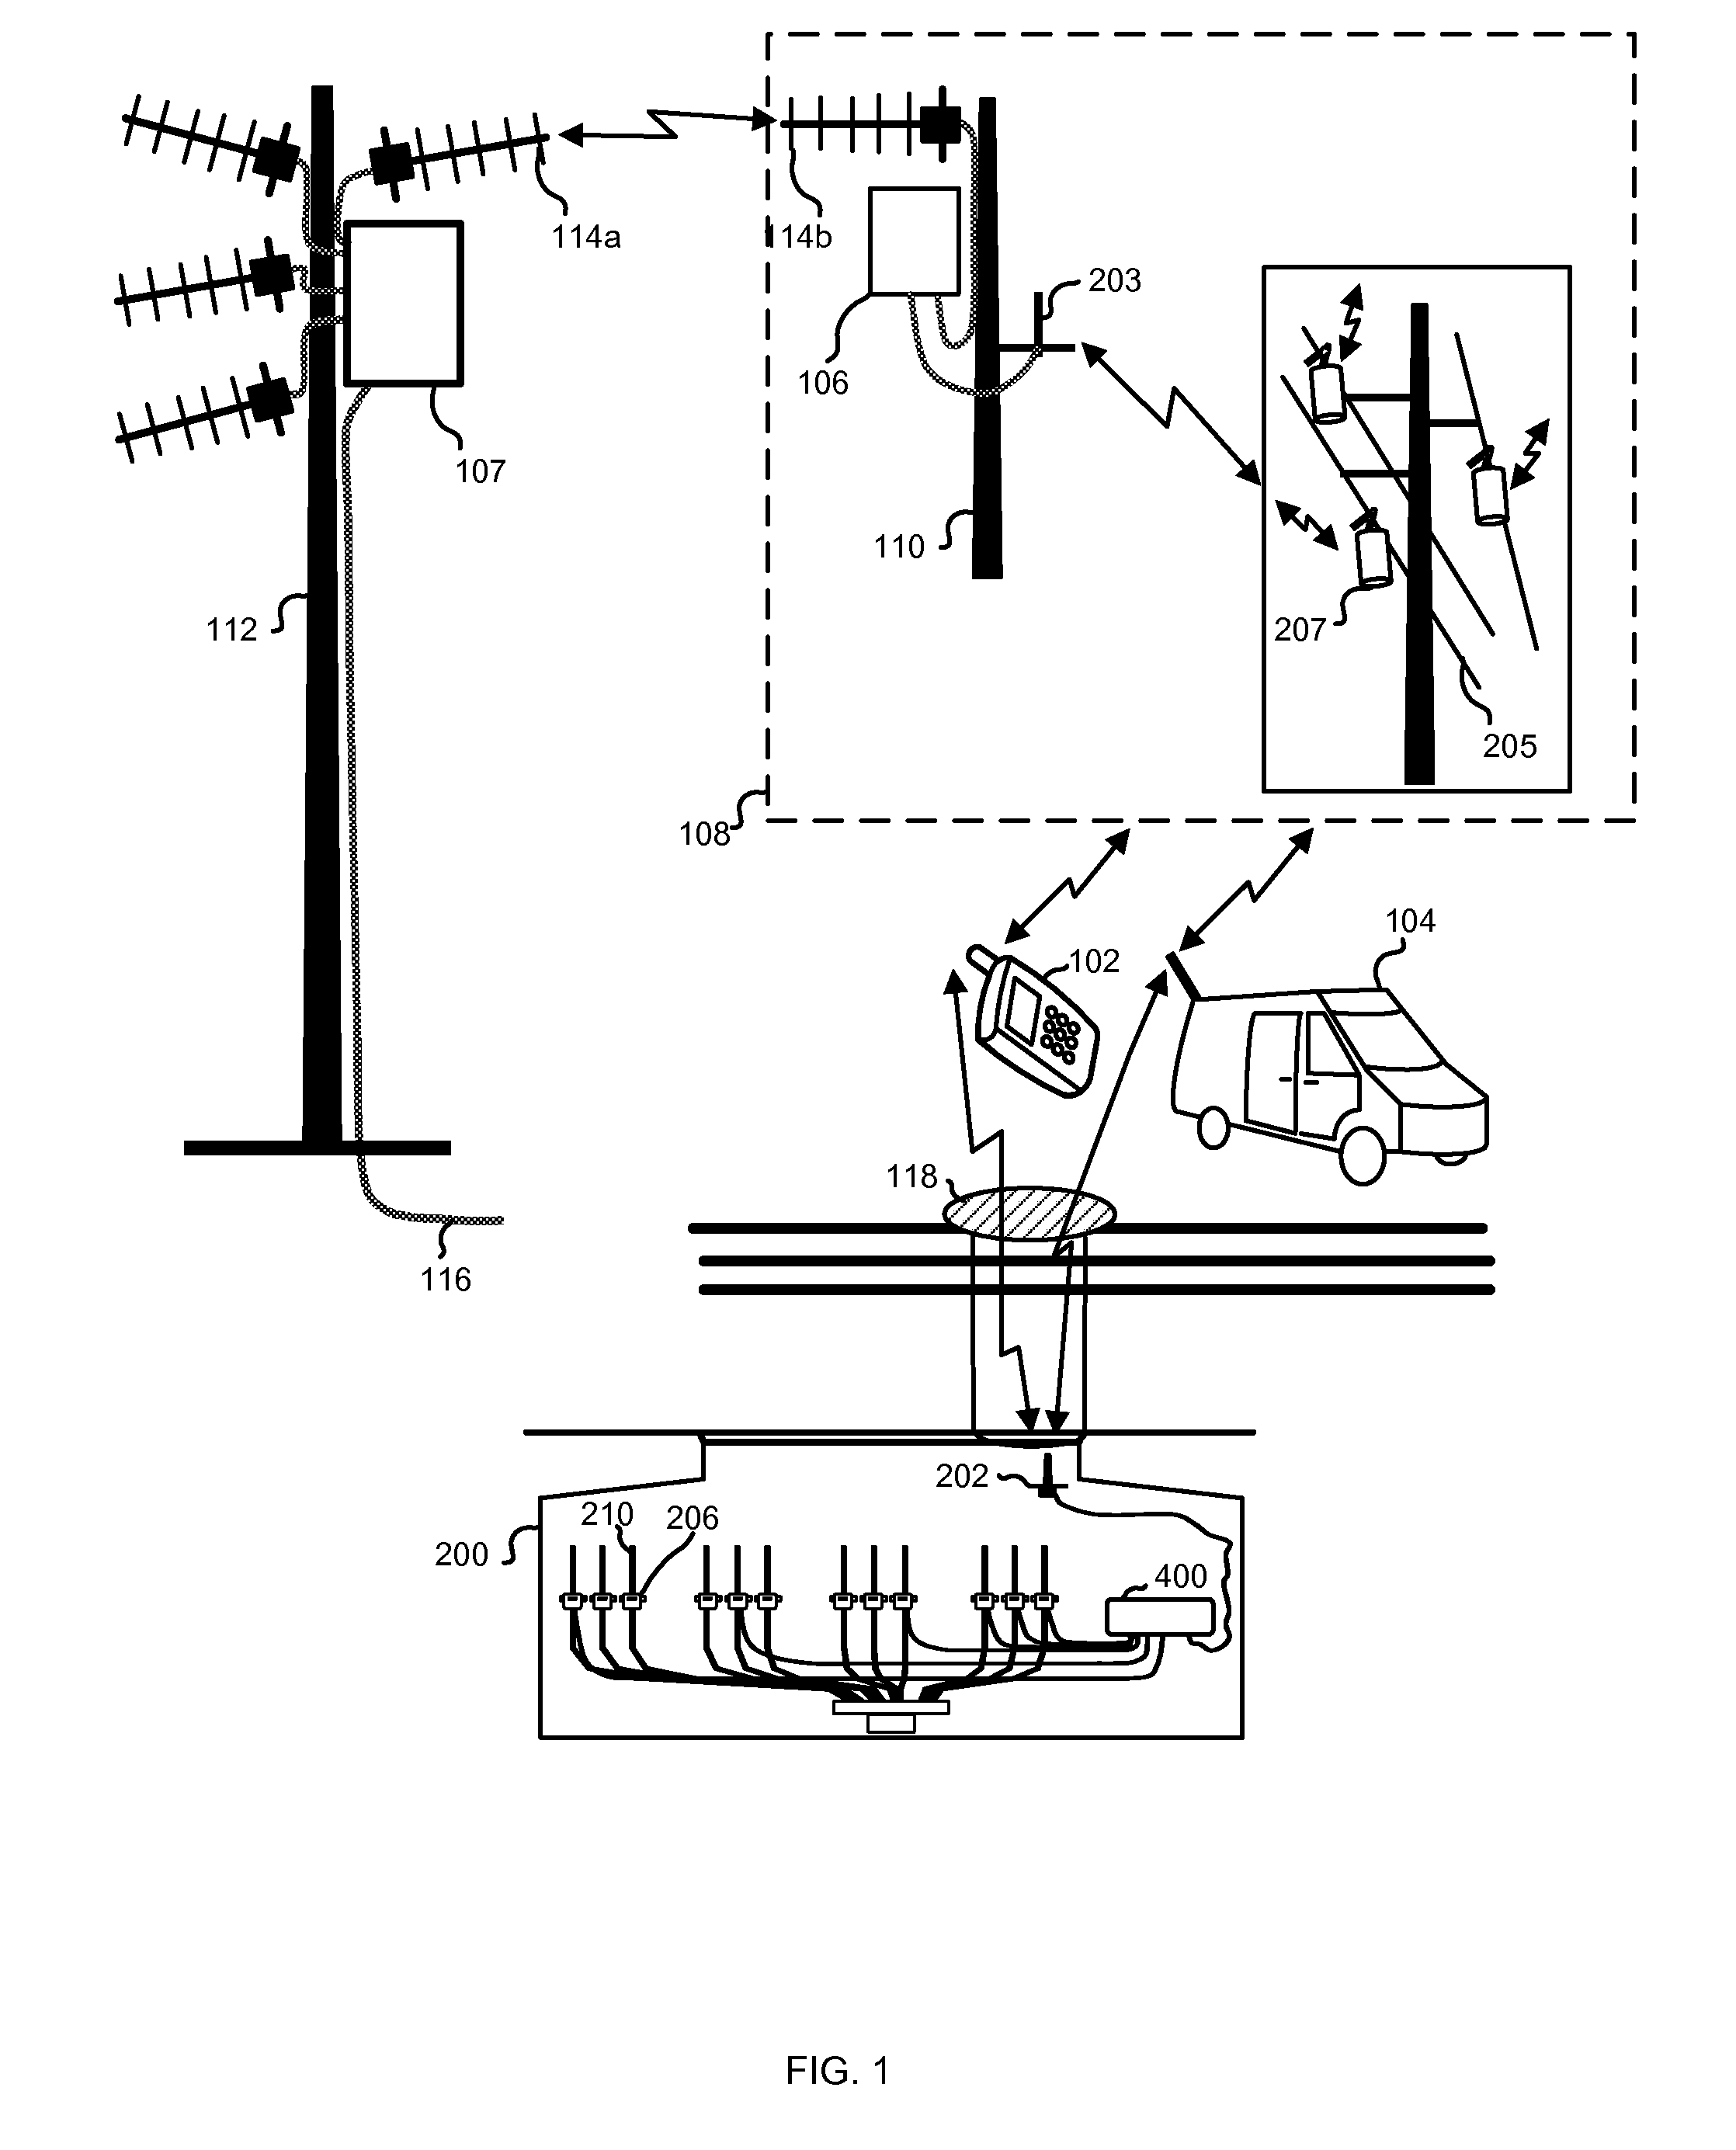 Magnetic probe apparatus and method for providing a wireless connection to a detection device